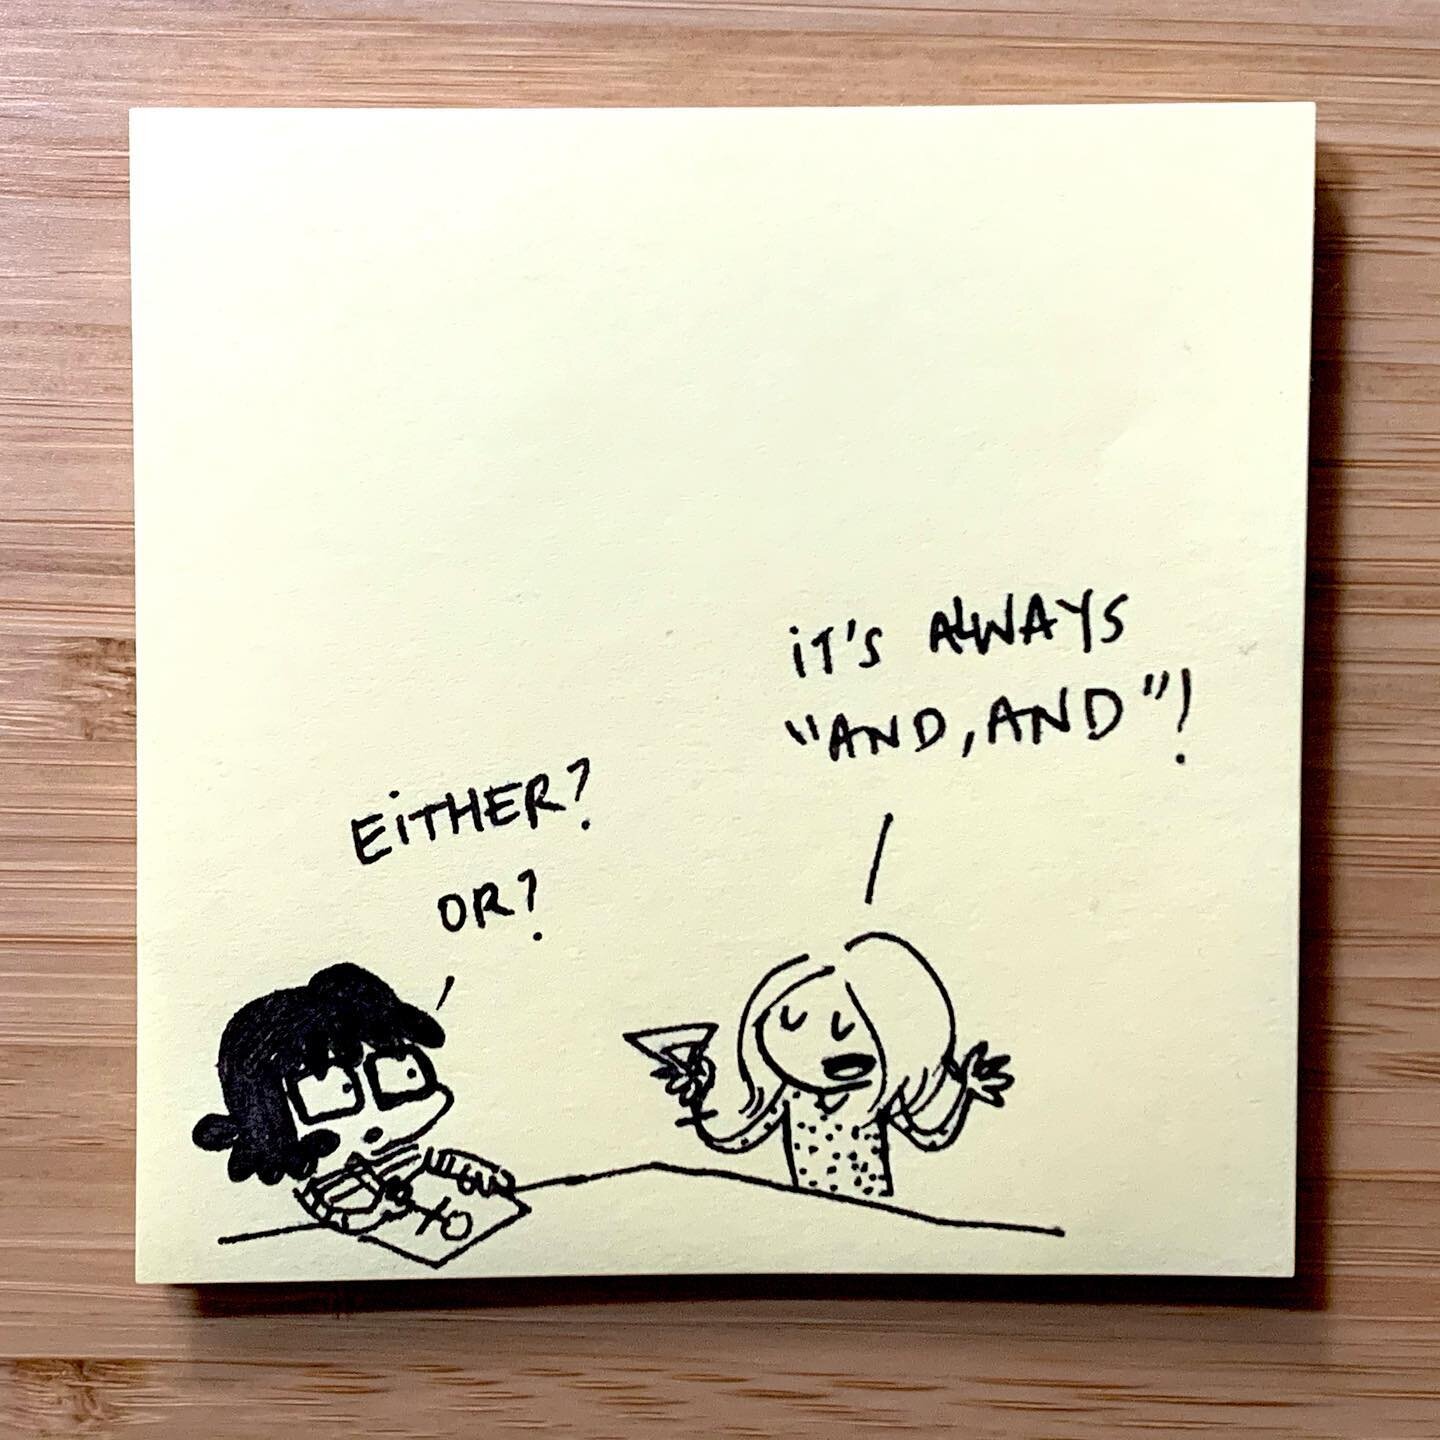 Never choose, always get both. 
AND, AND.
#2020wisdom #lookslikeimback #postit #cartoon #doodle #2020